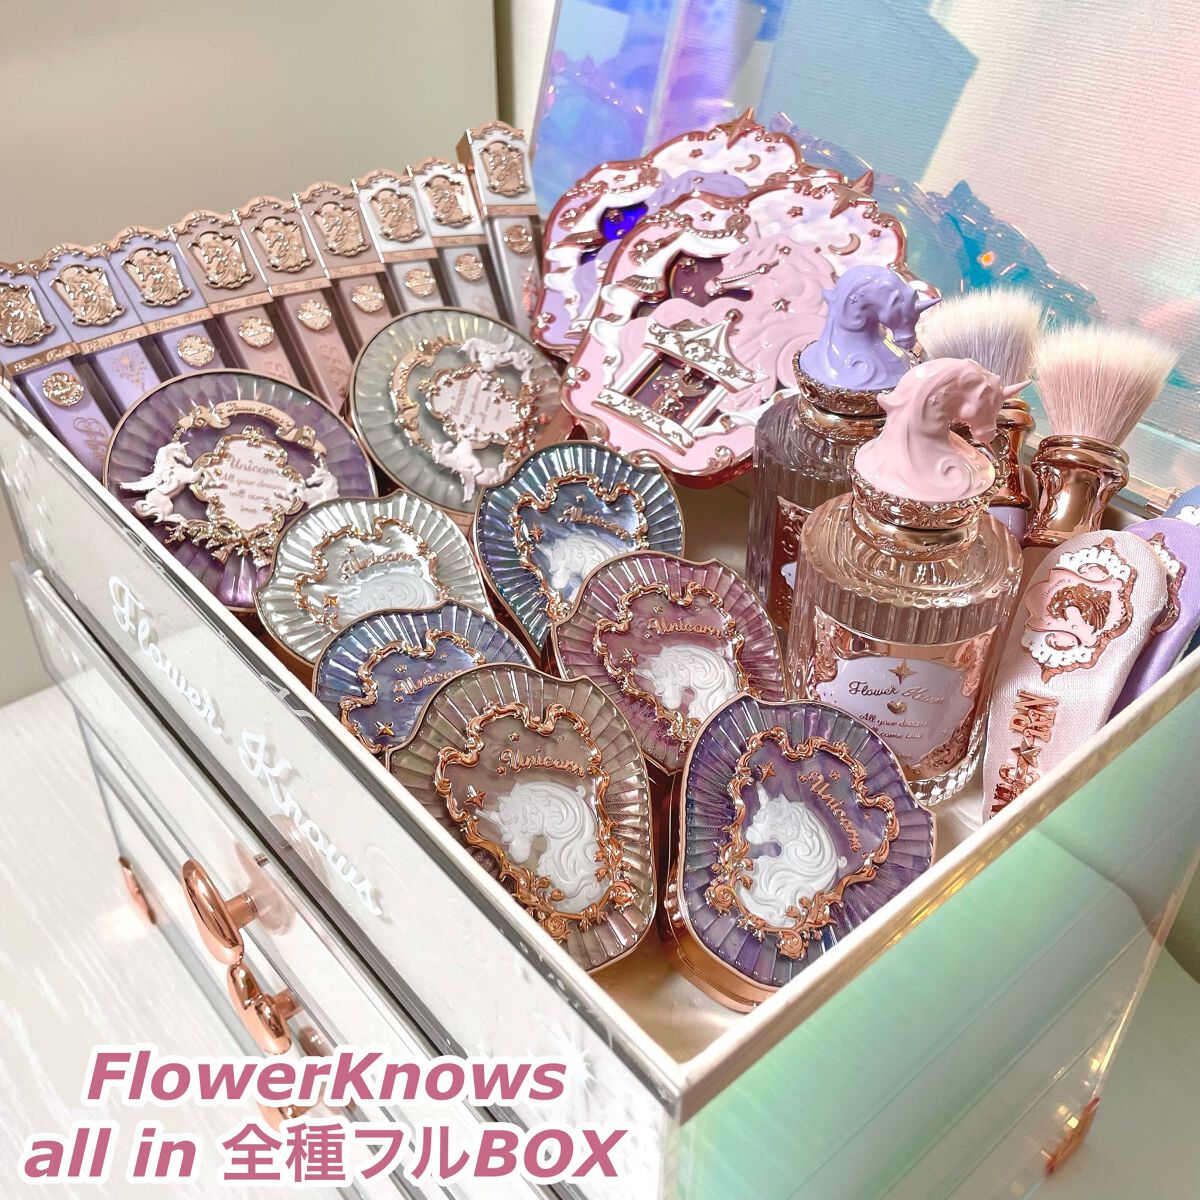 FlowerKnowsチョコレートシリーズ ALL in 全種フルボックス-